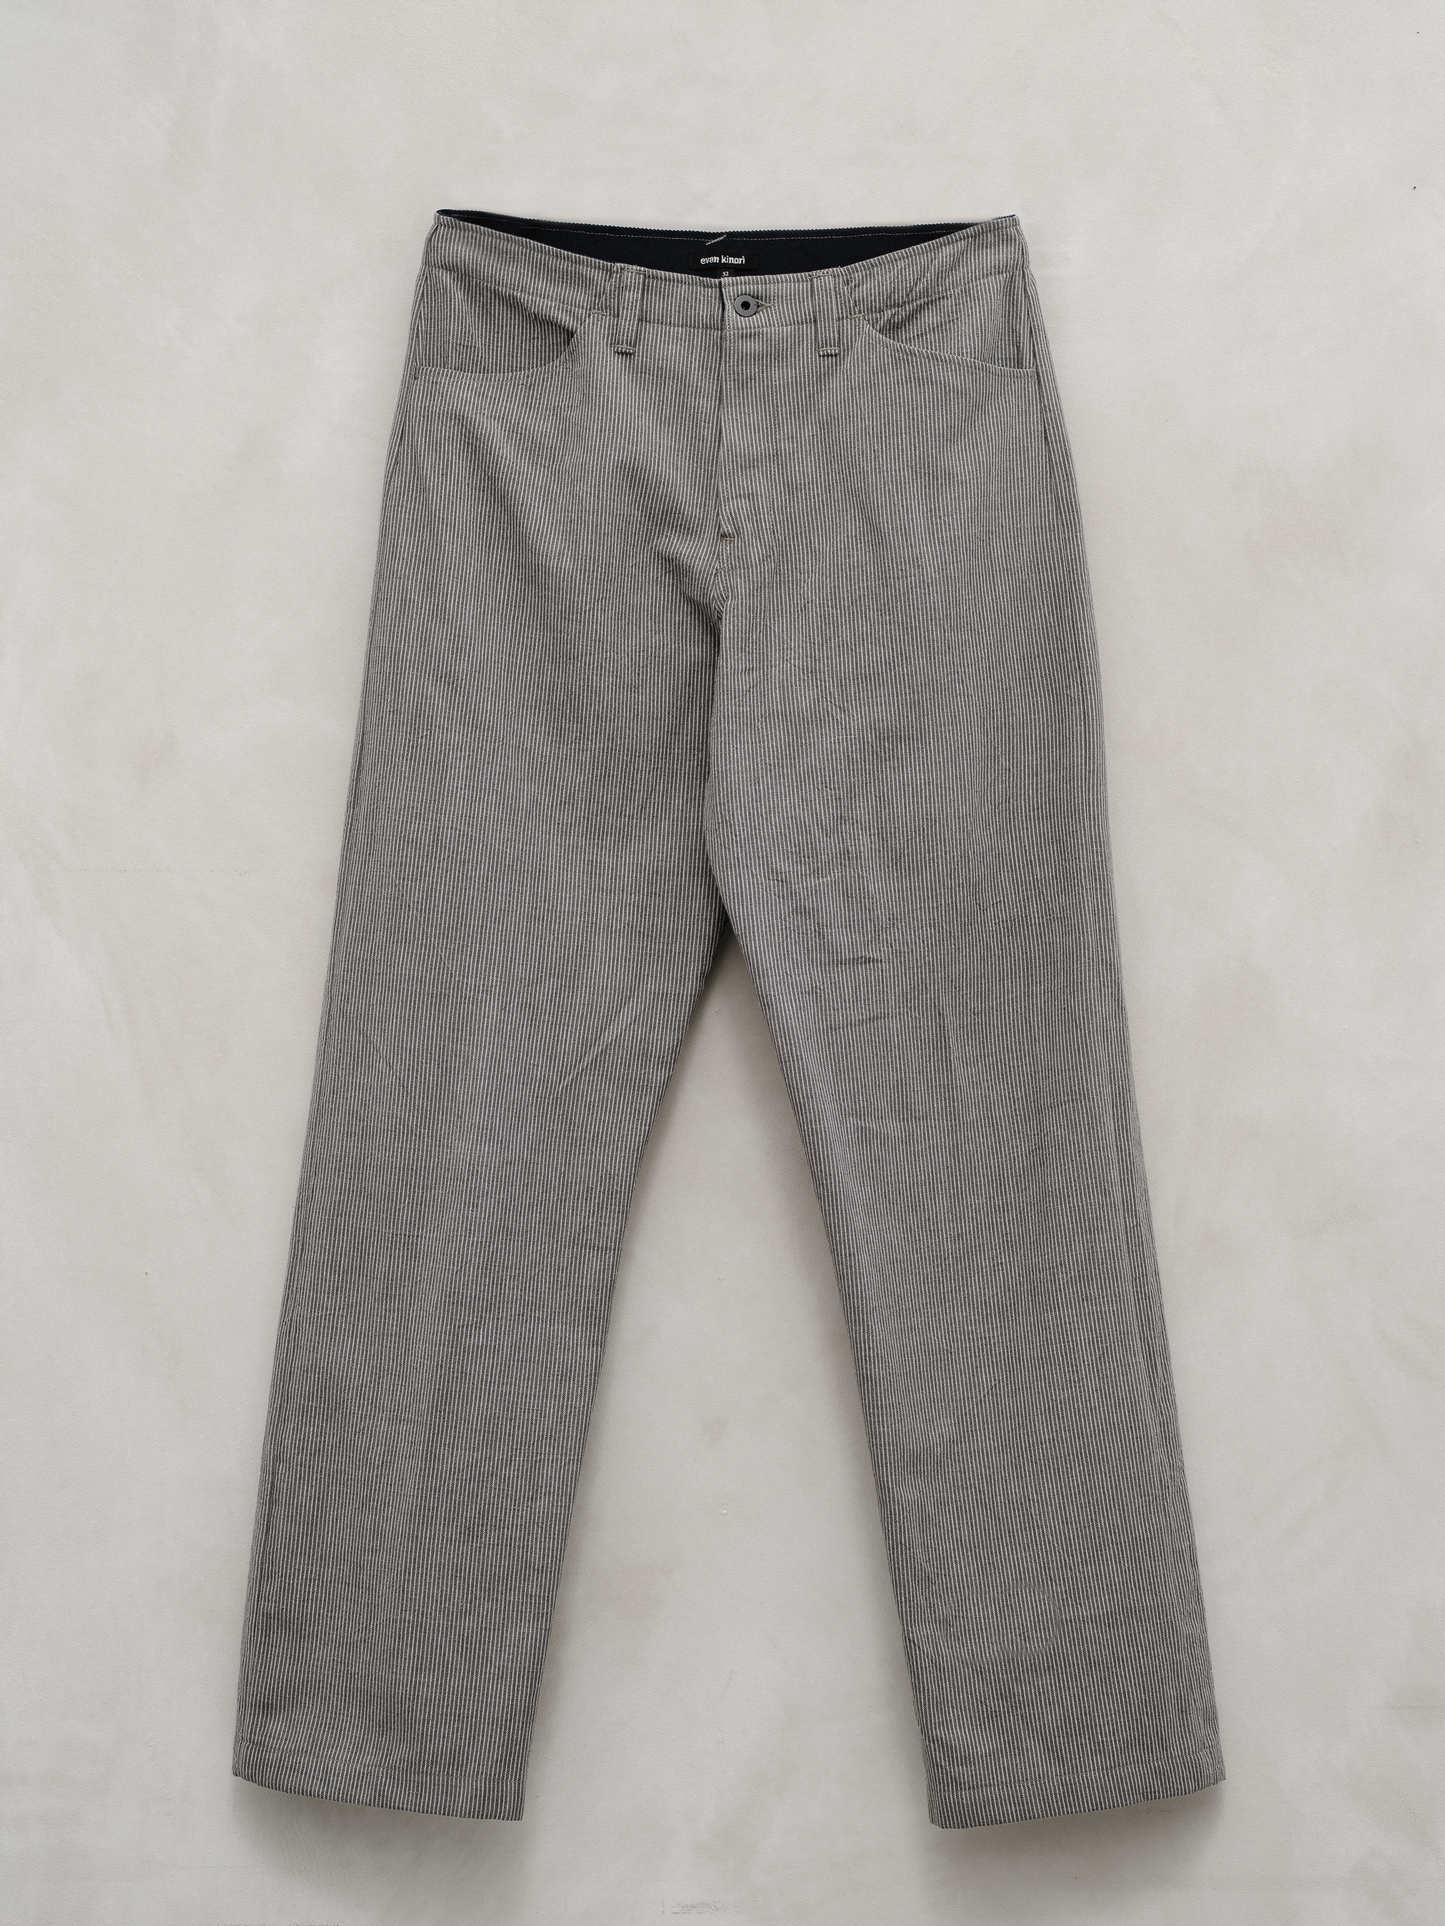 Four Pocket Pant - Sumi Ink Striped Cotton